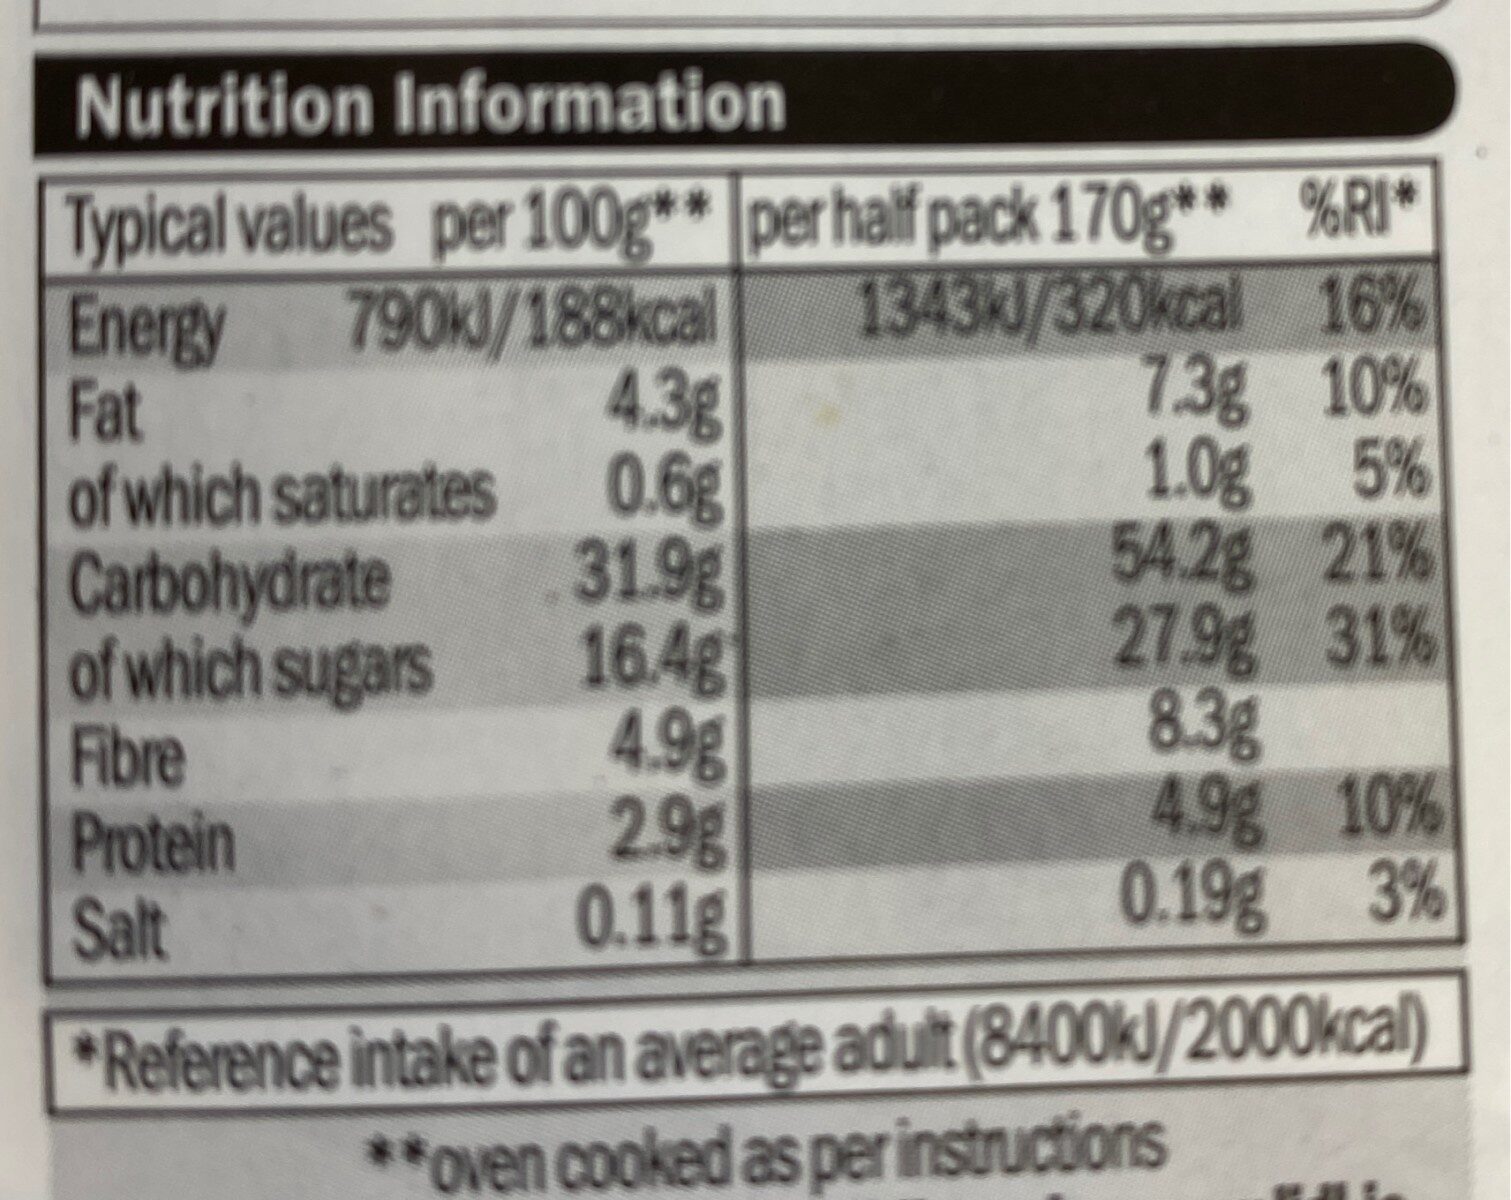 Sweet potato fried - Nutrition facts